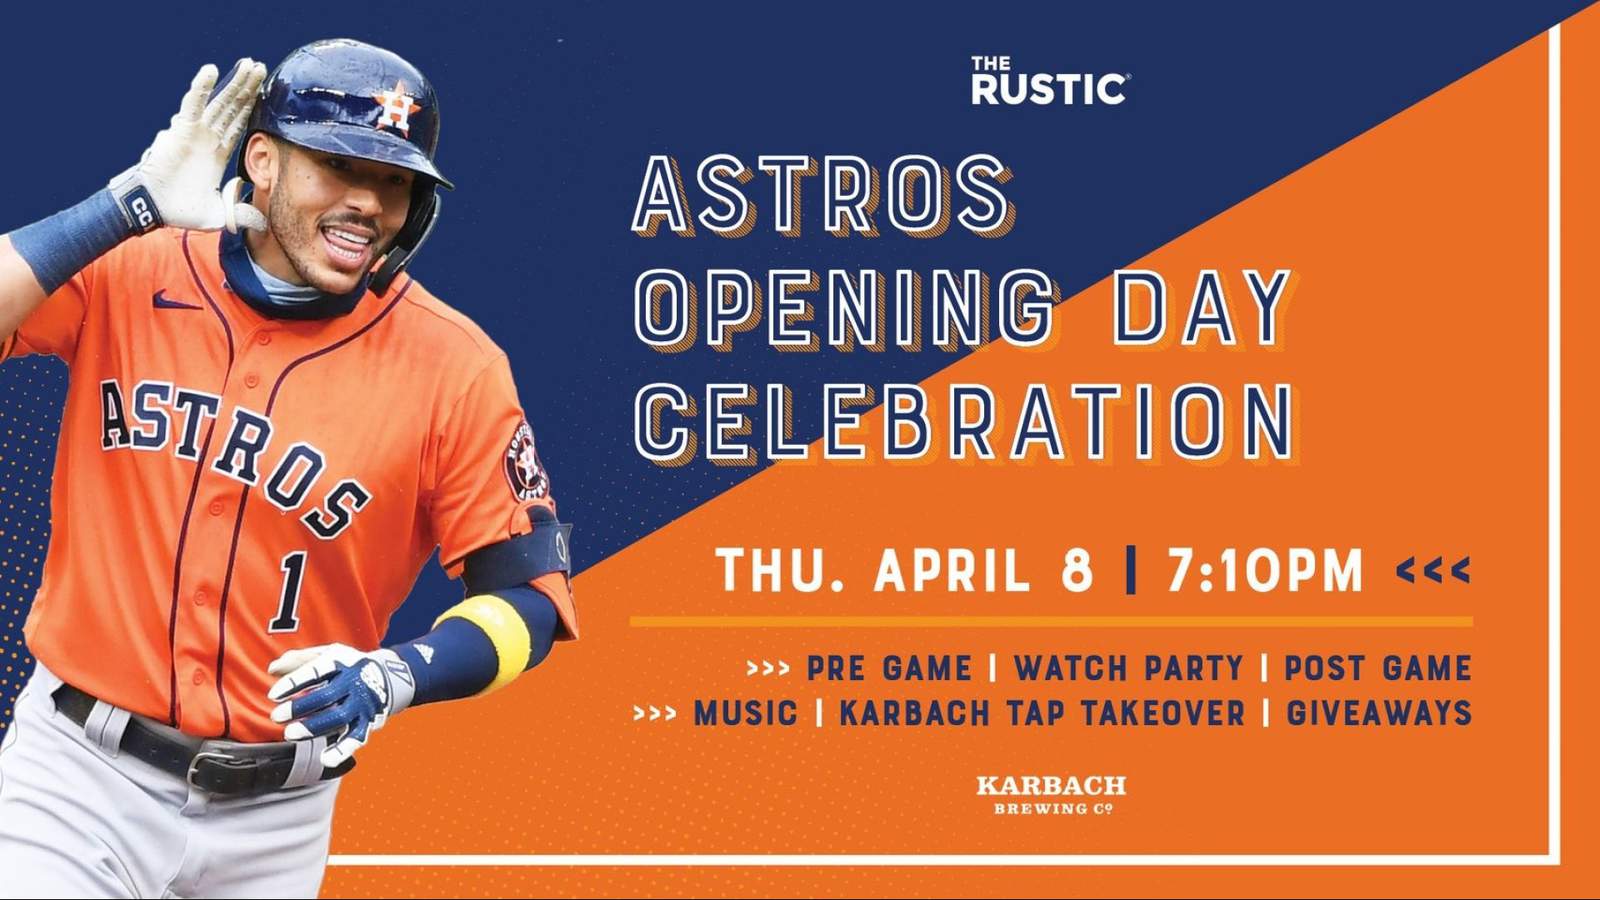 Play Ball with the Rustic for their Astros Opening Day Celebration